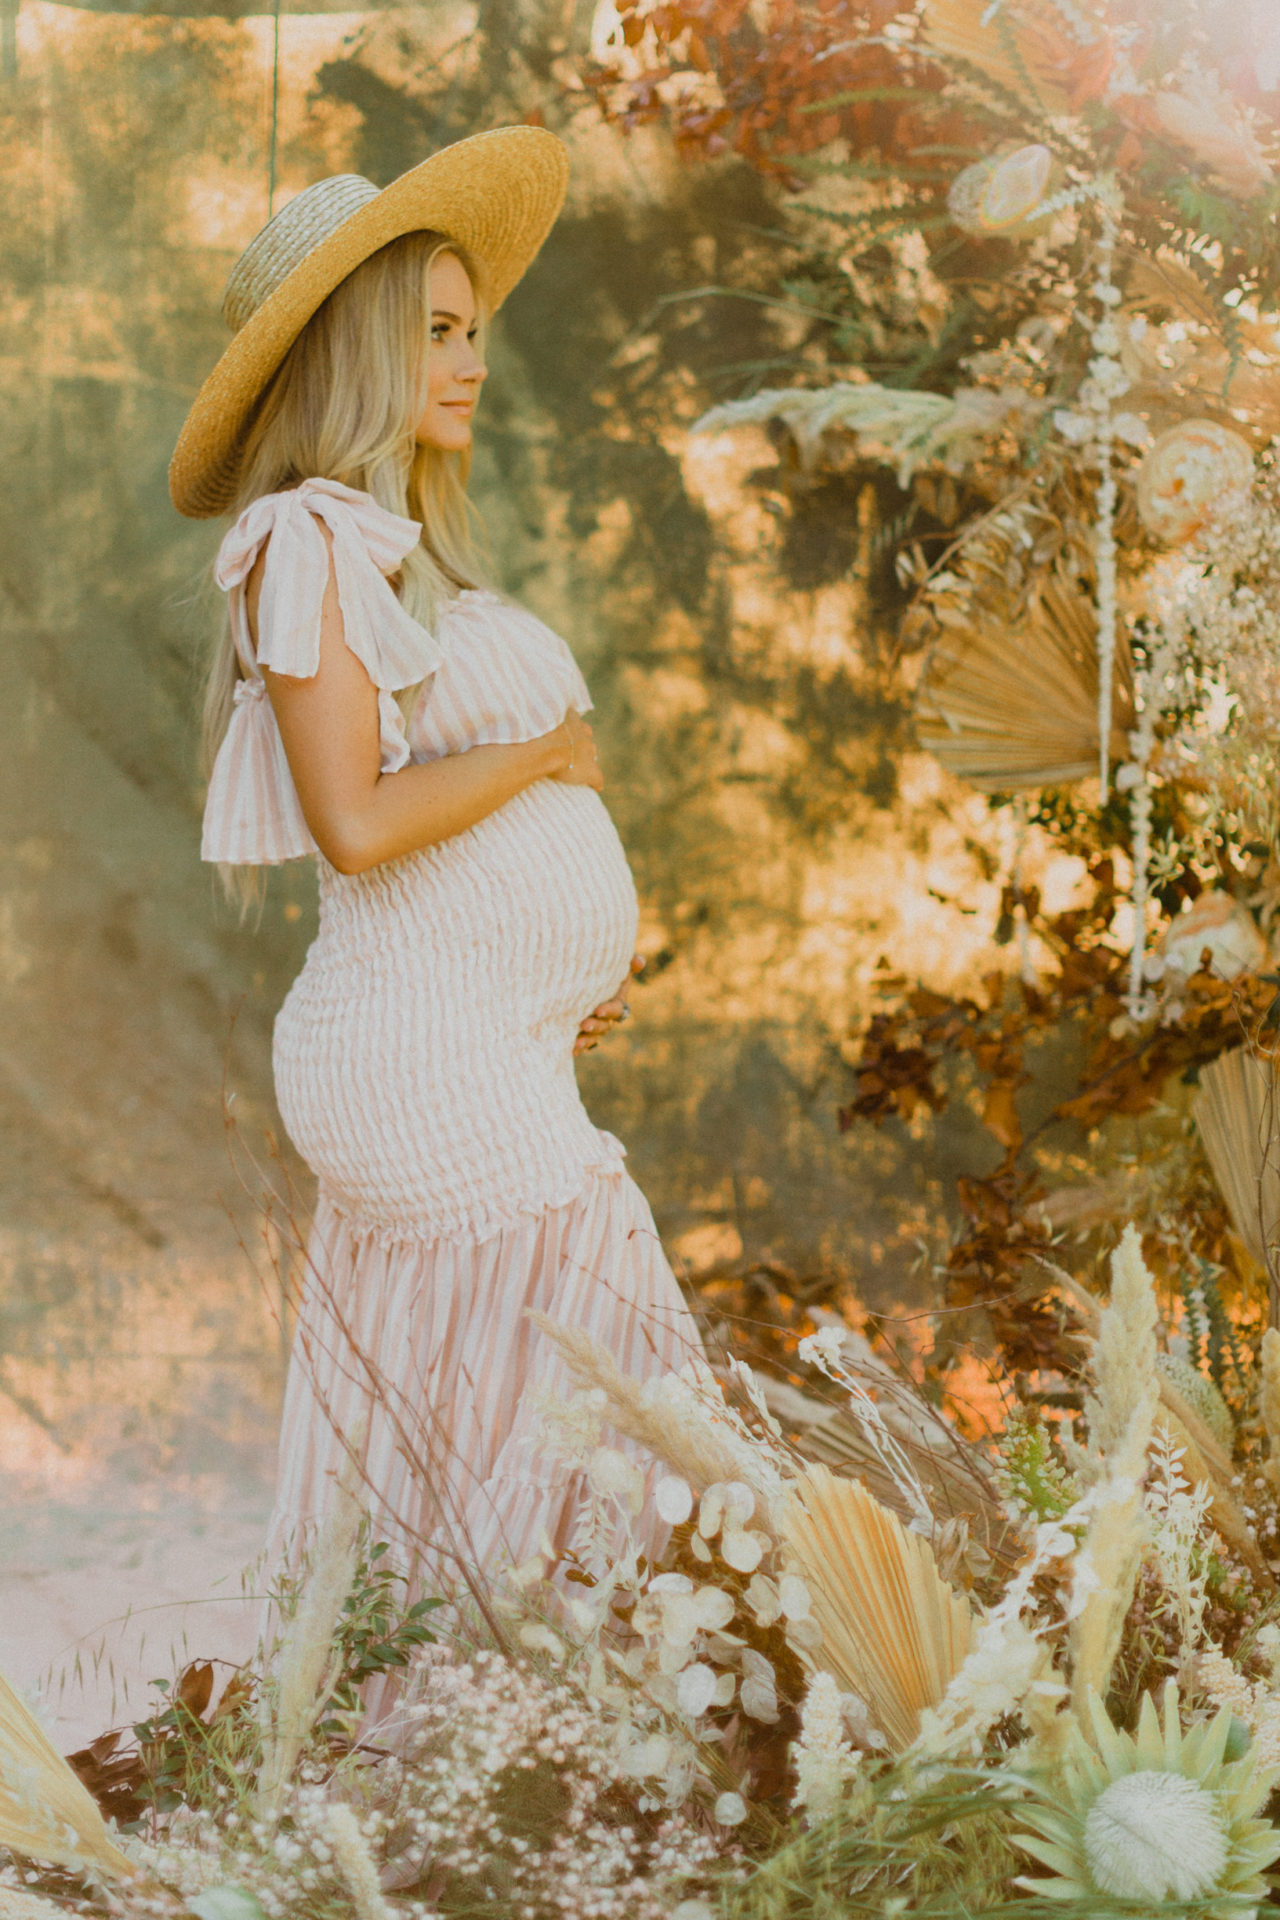 Wild flower maternity shoot with sun hat